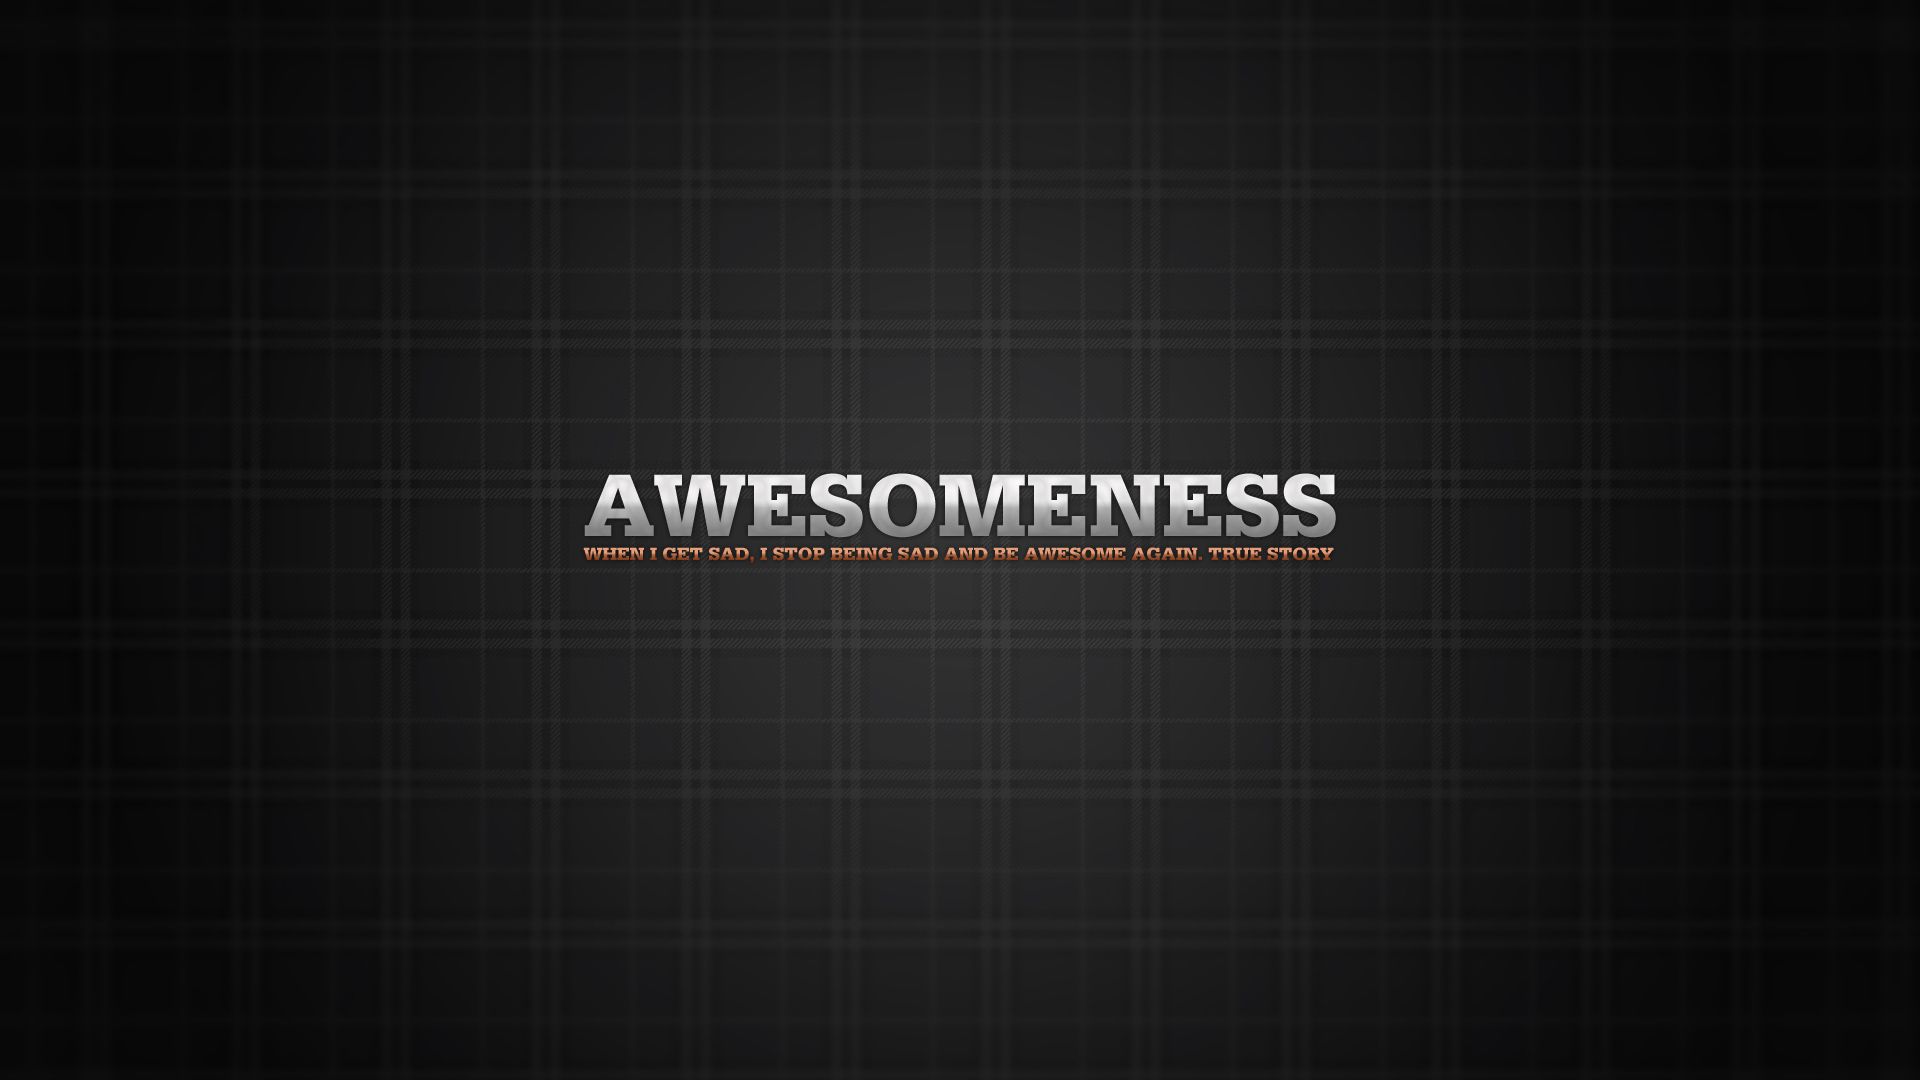 Awesomeness, Full HD 1080p wallpaper, funny quote, true story ...